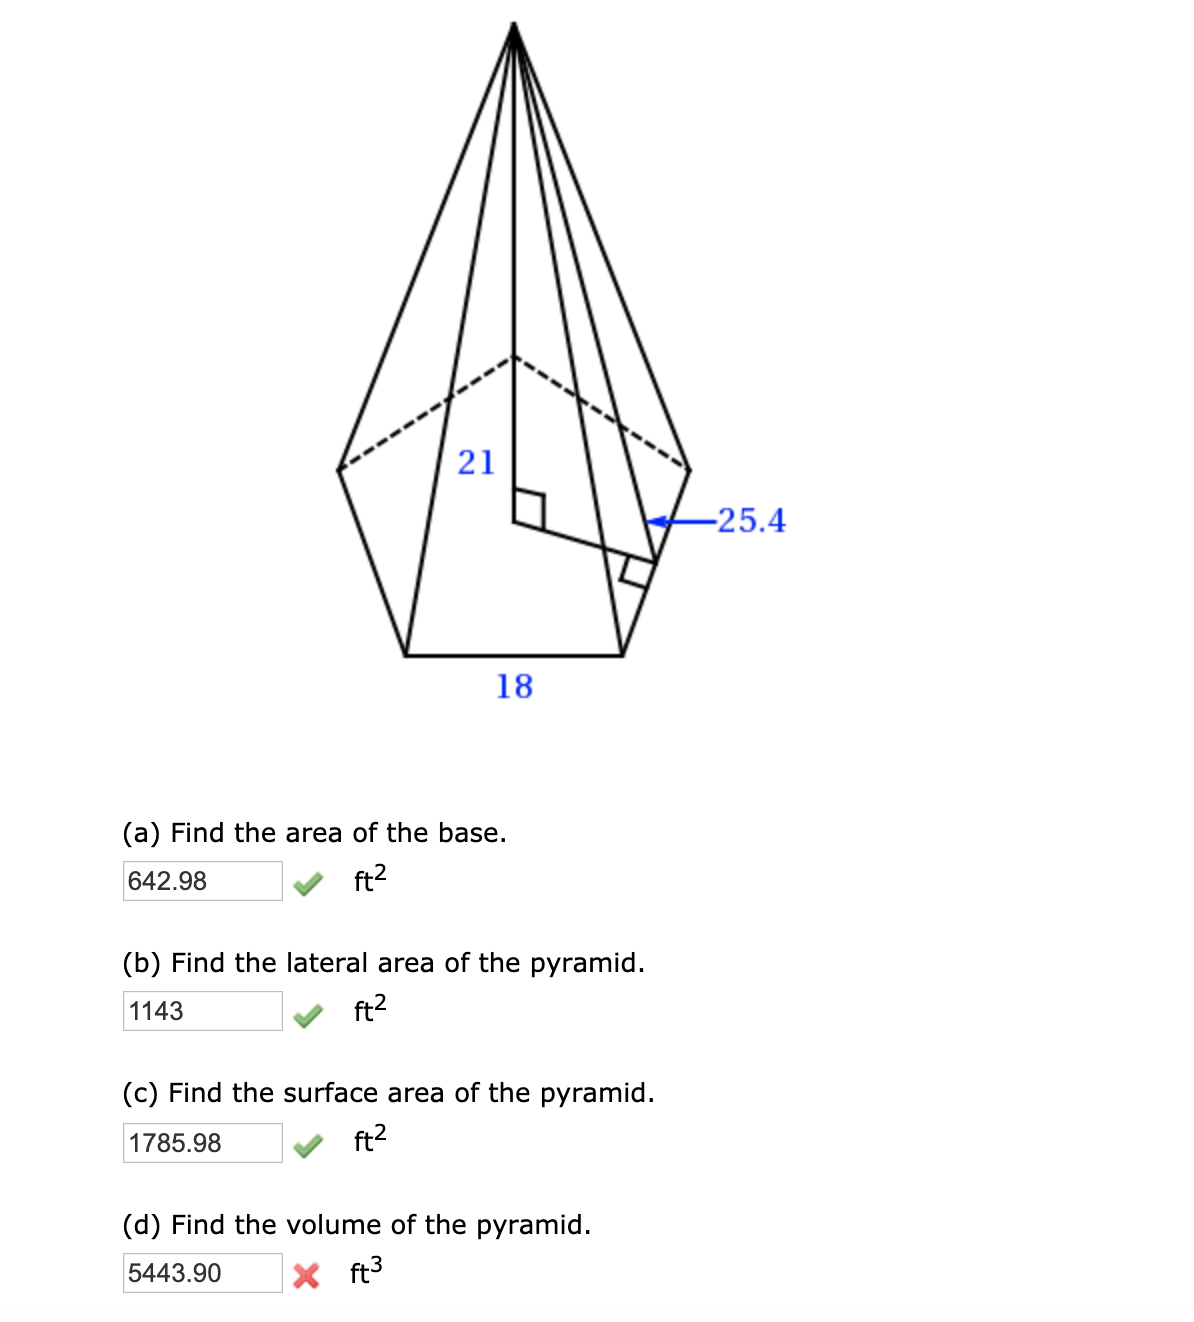 21
-25.4
18
(a) Find the area of the base.
642.98
ft2
(b) Find the lateral area of the pyramid.
1143
ft2
(c) Find the surface area of the pyramid.
1785.98
ft?
(d) Find the volume of the pyramid.
5443.90
X ft3
